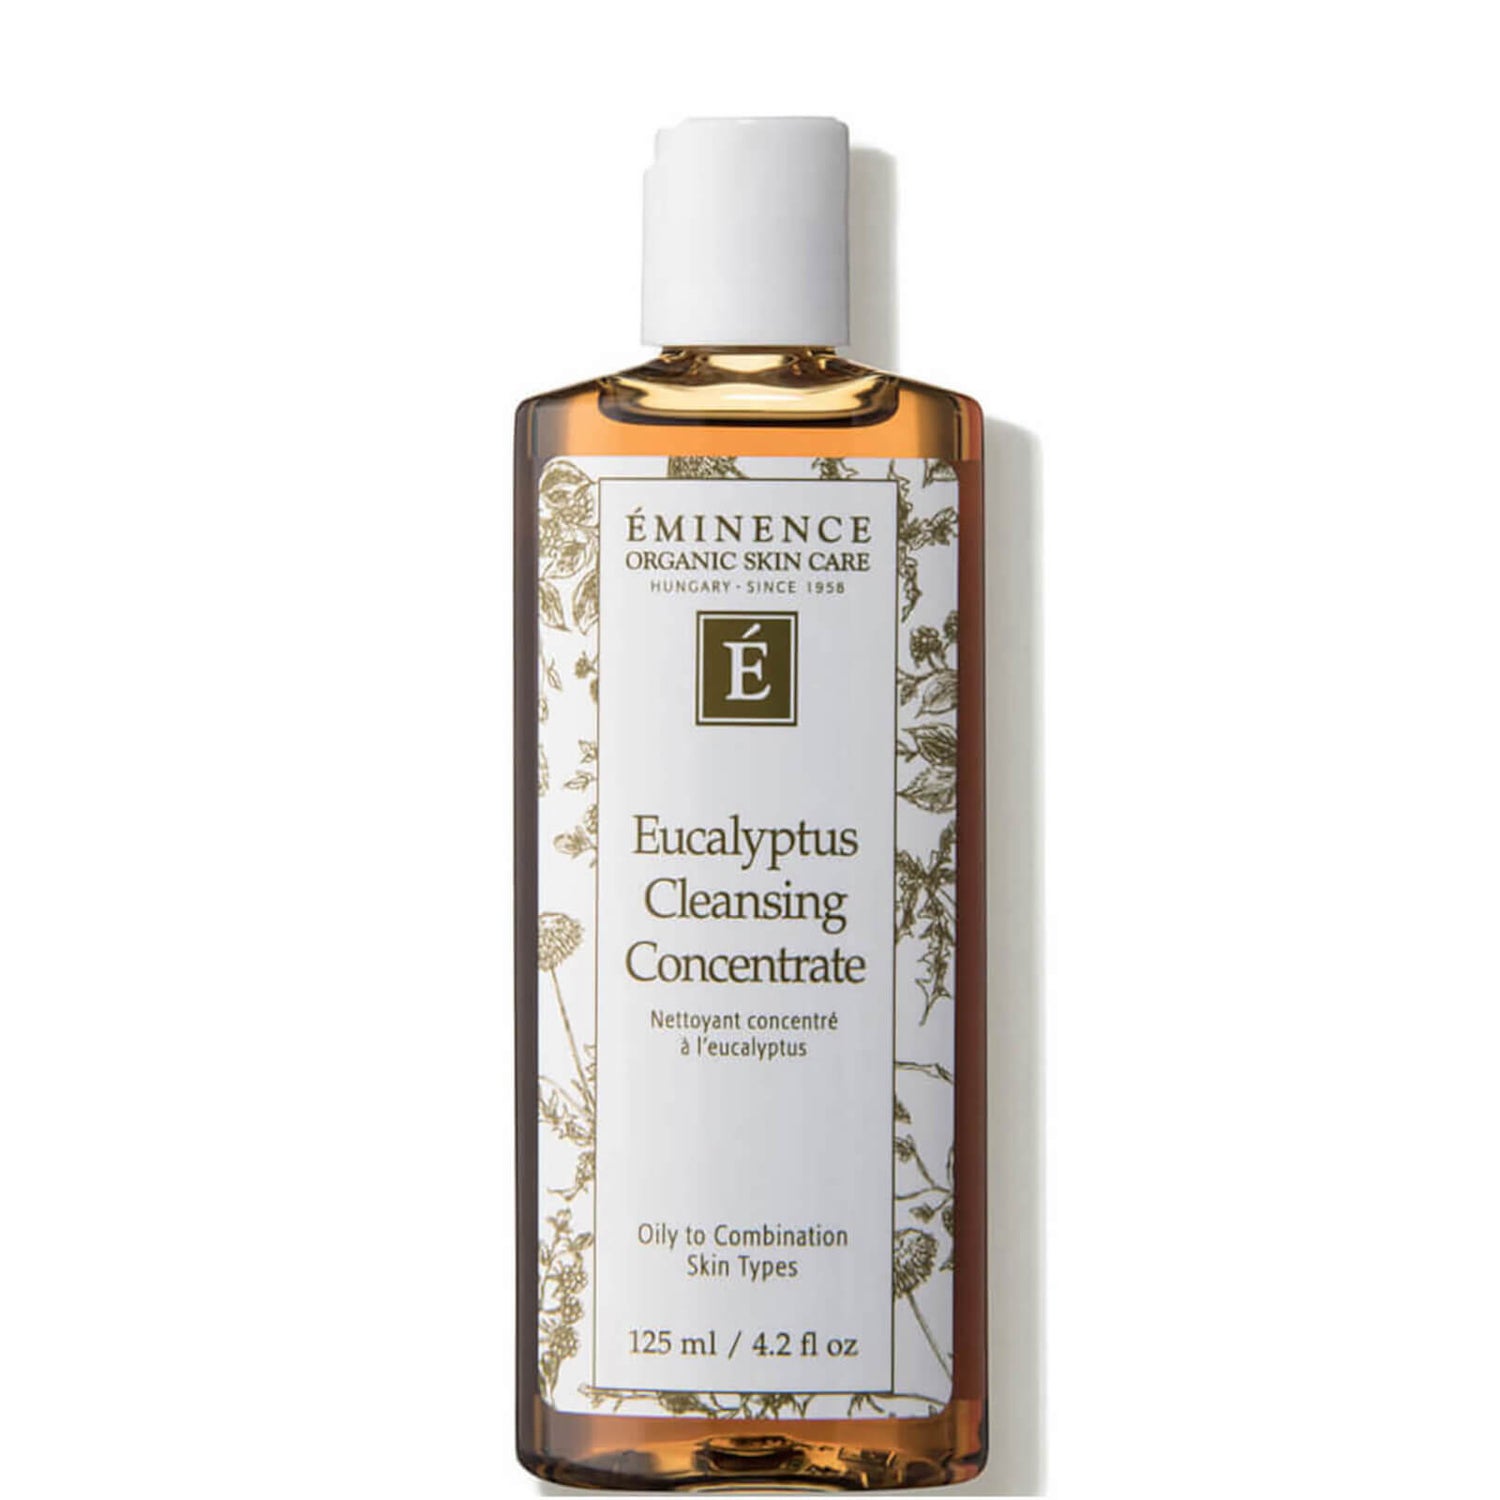 Eminence Organic Skin Care Eucalyptus Cleansing Concentrate 4.2 fl. oz